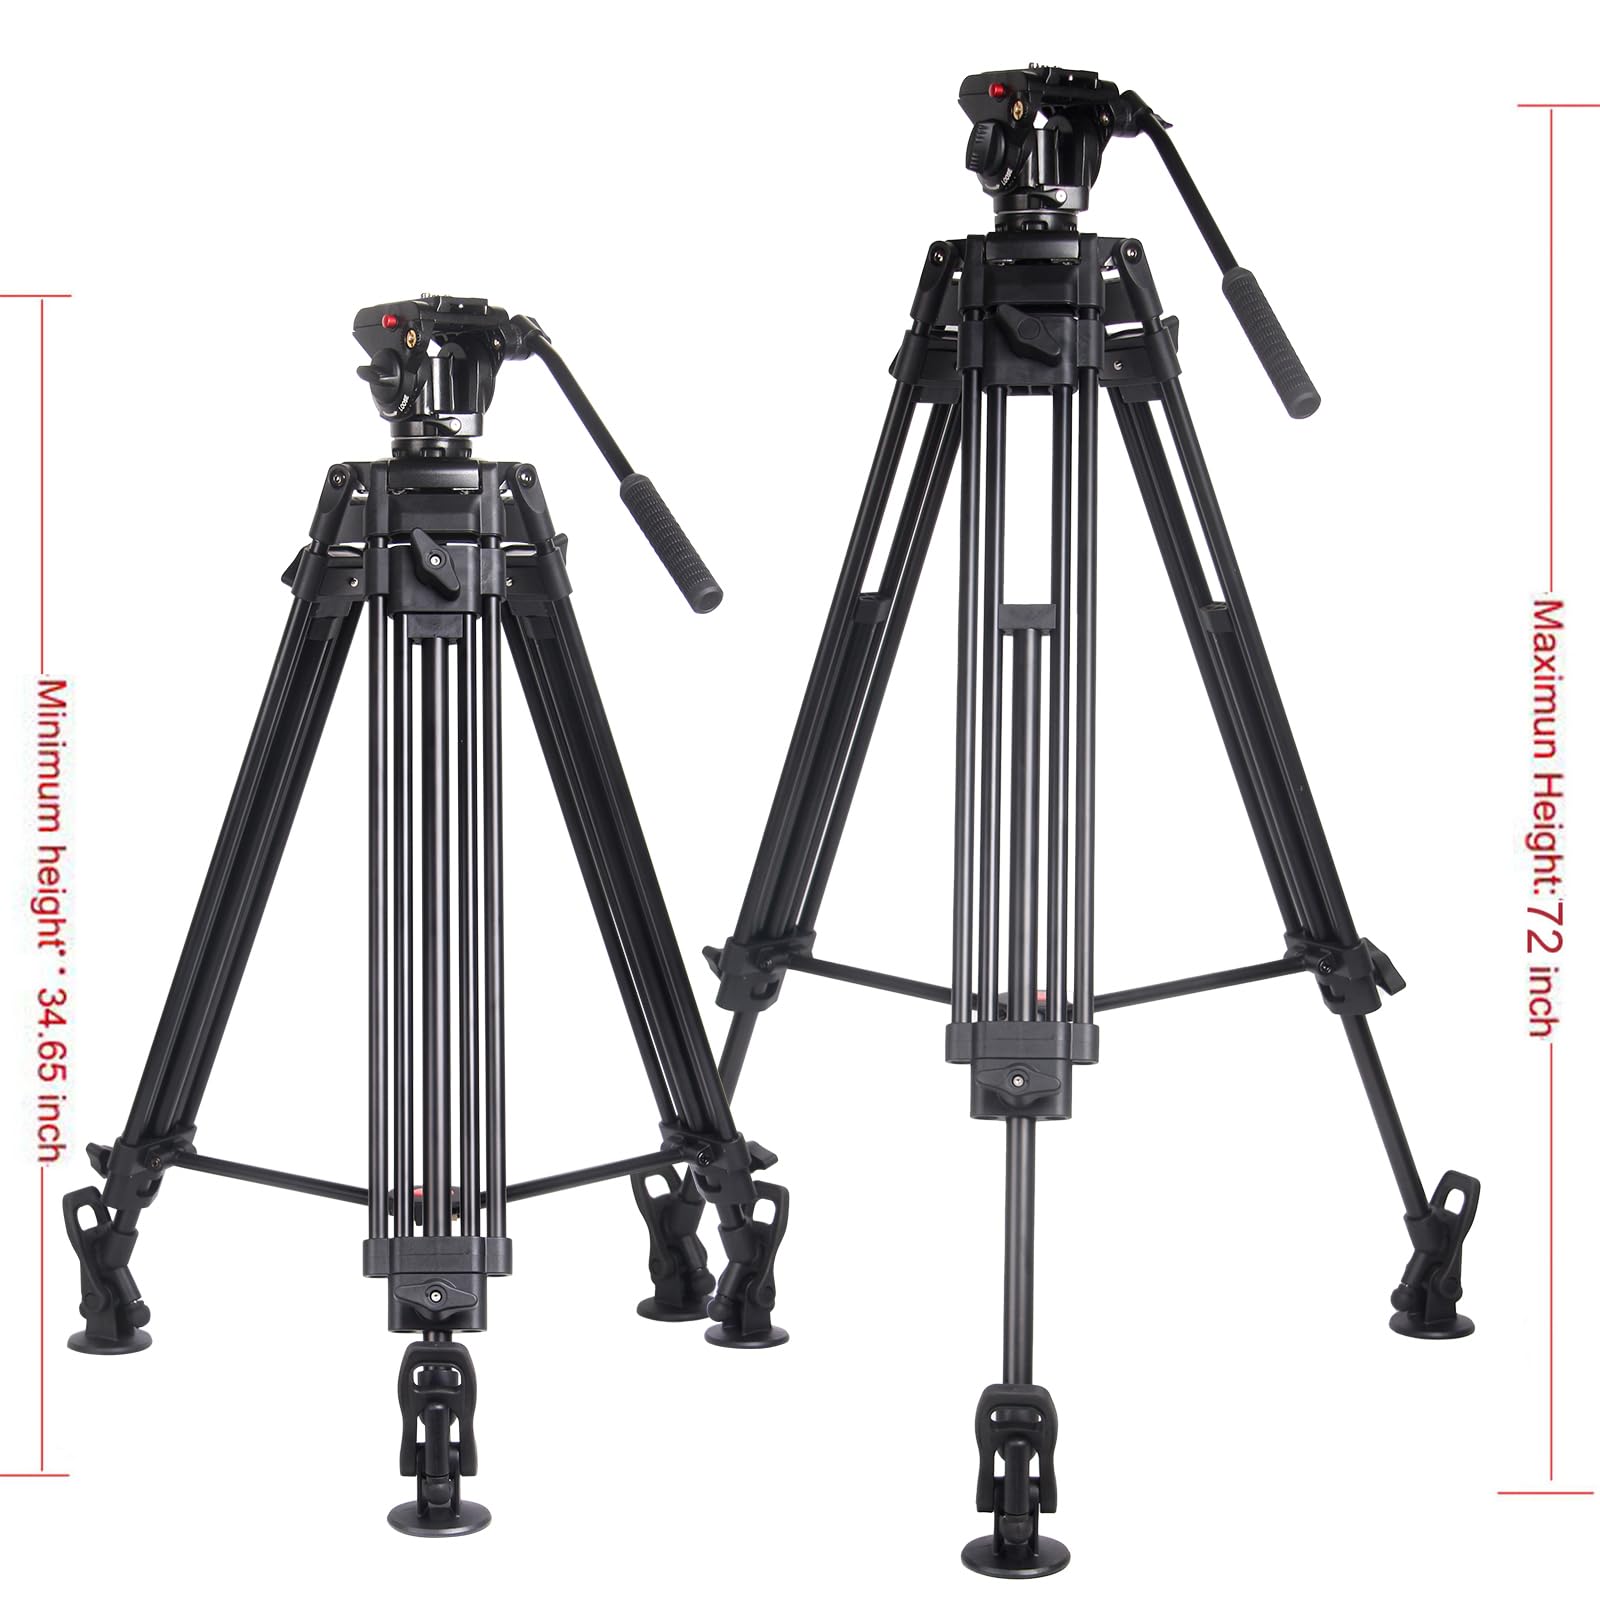 Video Tripod System, Regetek 72 Inch Professional Heavy Duty Aluminum Adjustable Photography Camera Tripod Stand with 360 Degree Fluid Drag Pan Head & Carry Bag for for Canon Nikon DV DSLR Camcorder